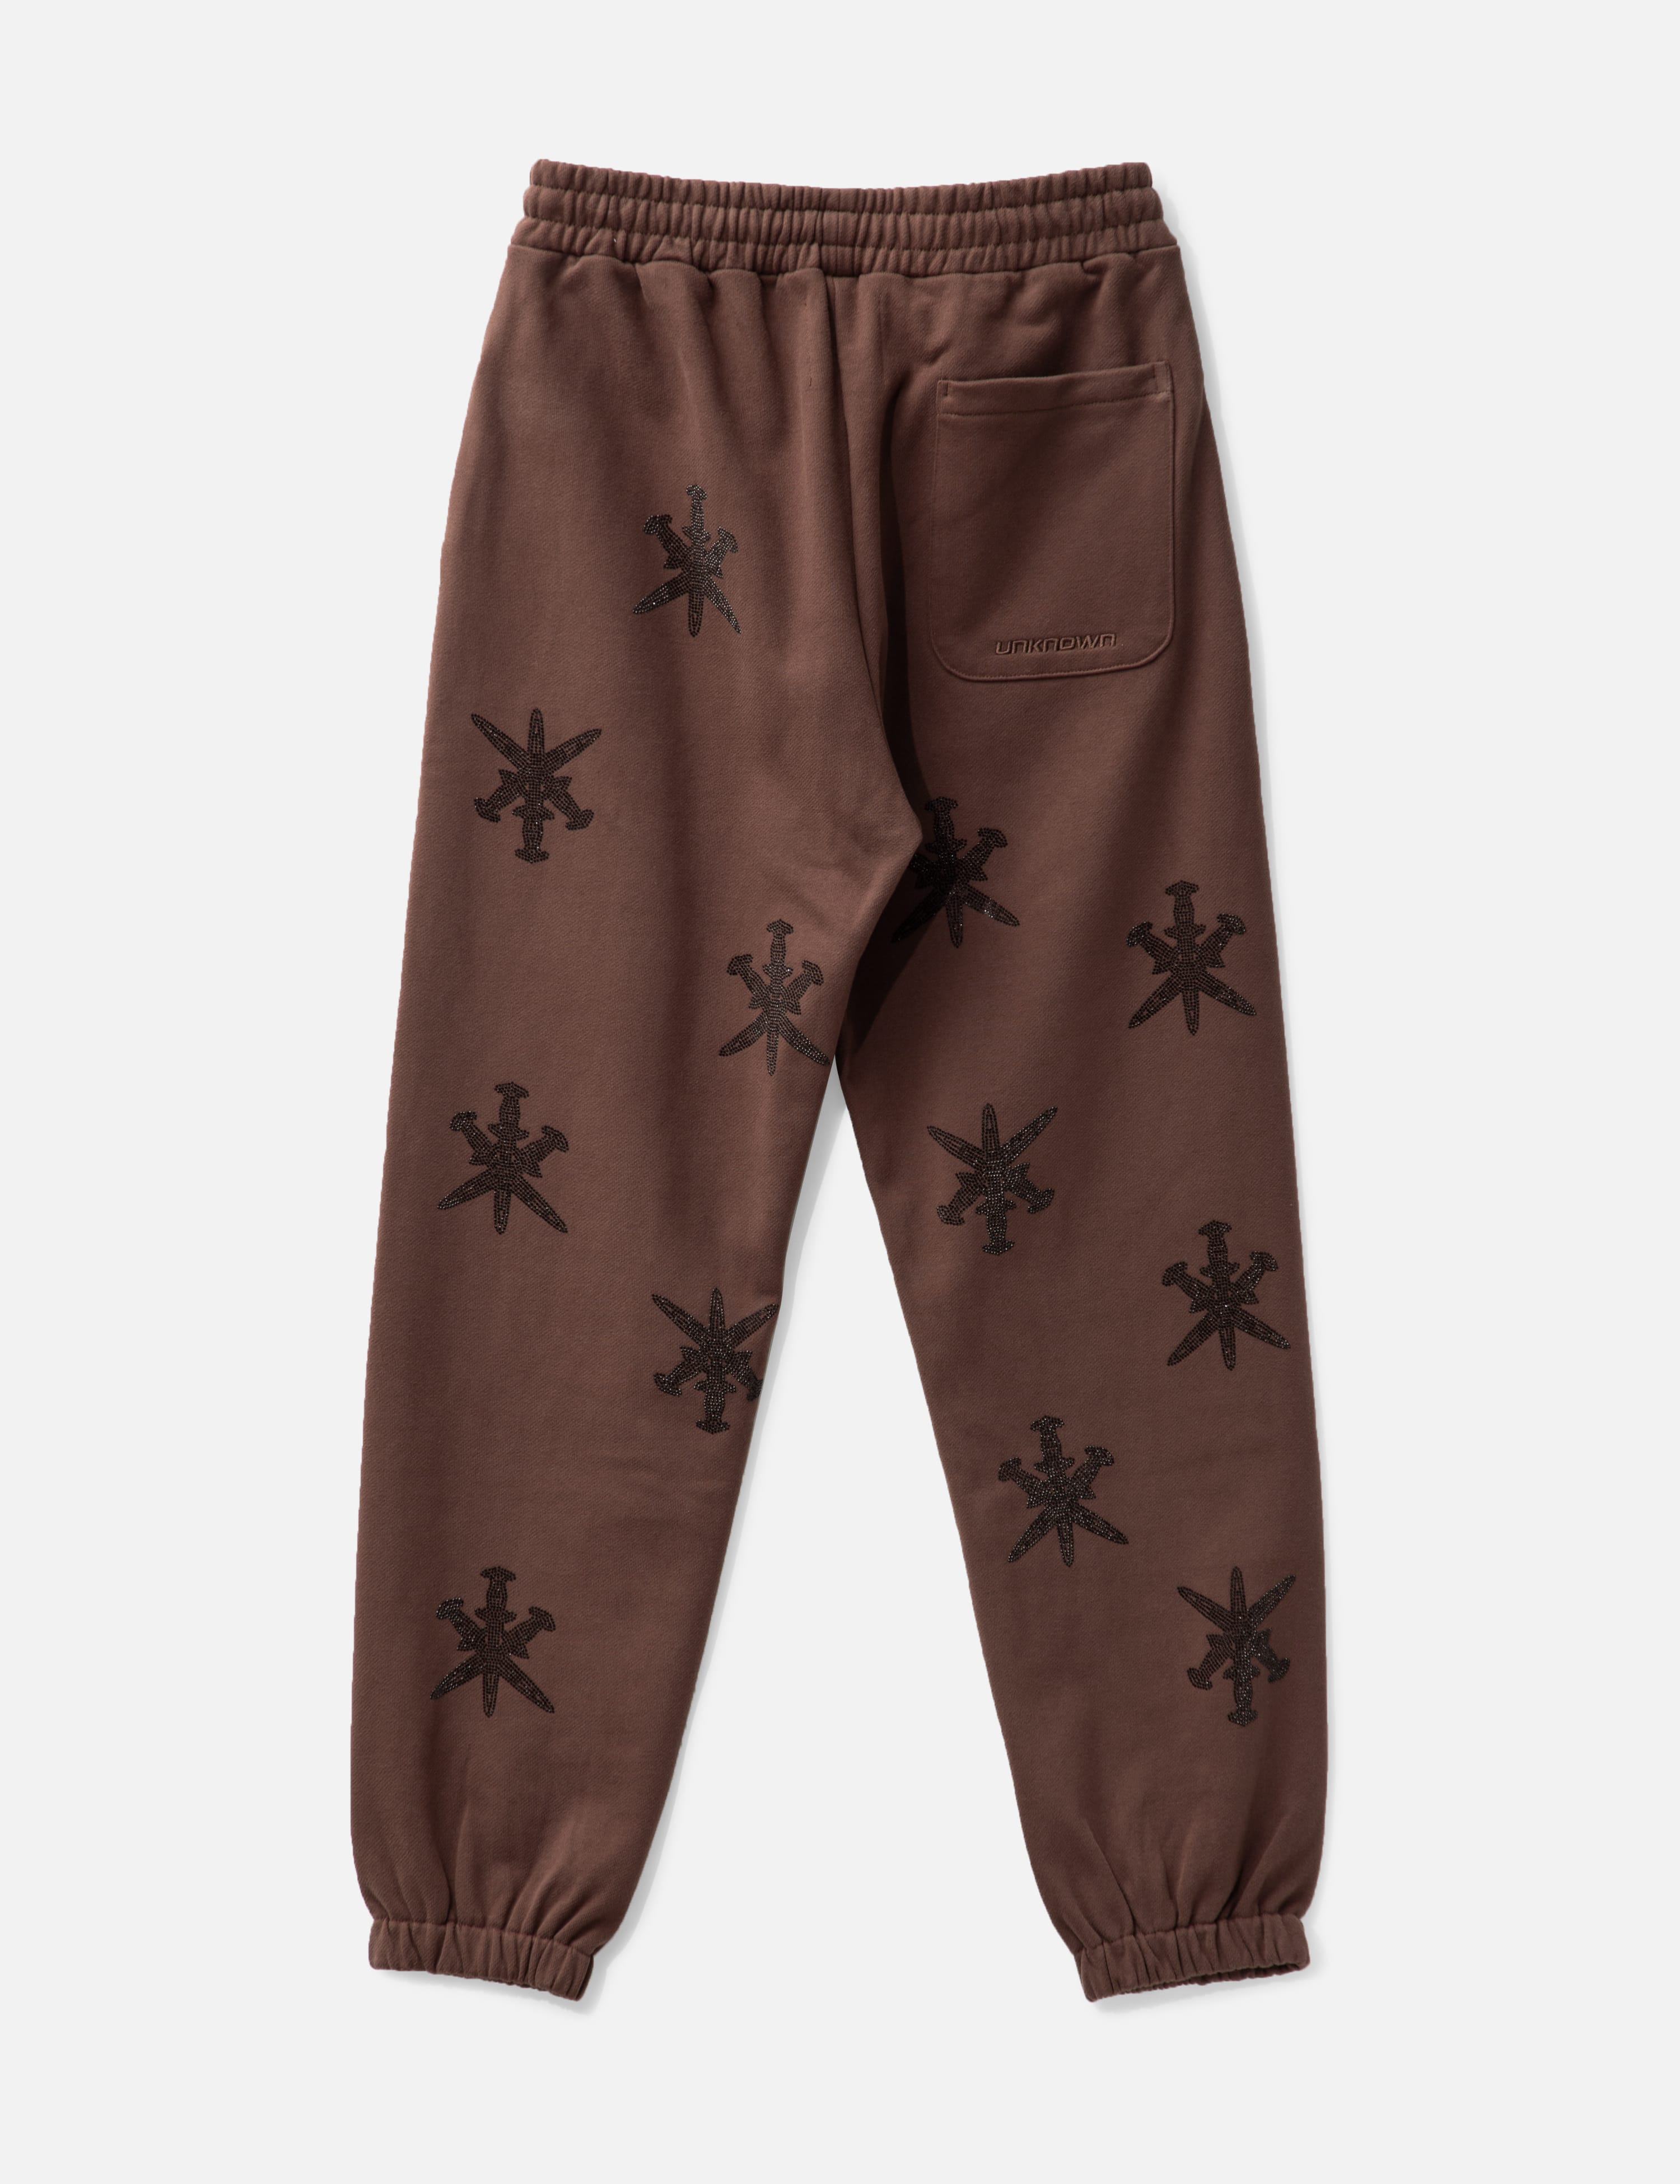 UNKNOWN - Brown Black Rhinestone Jogger | HBX - Globally Curated